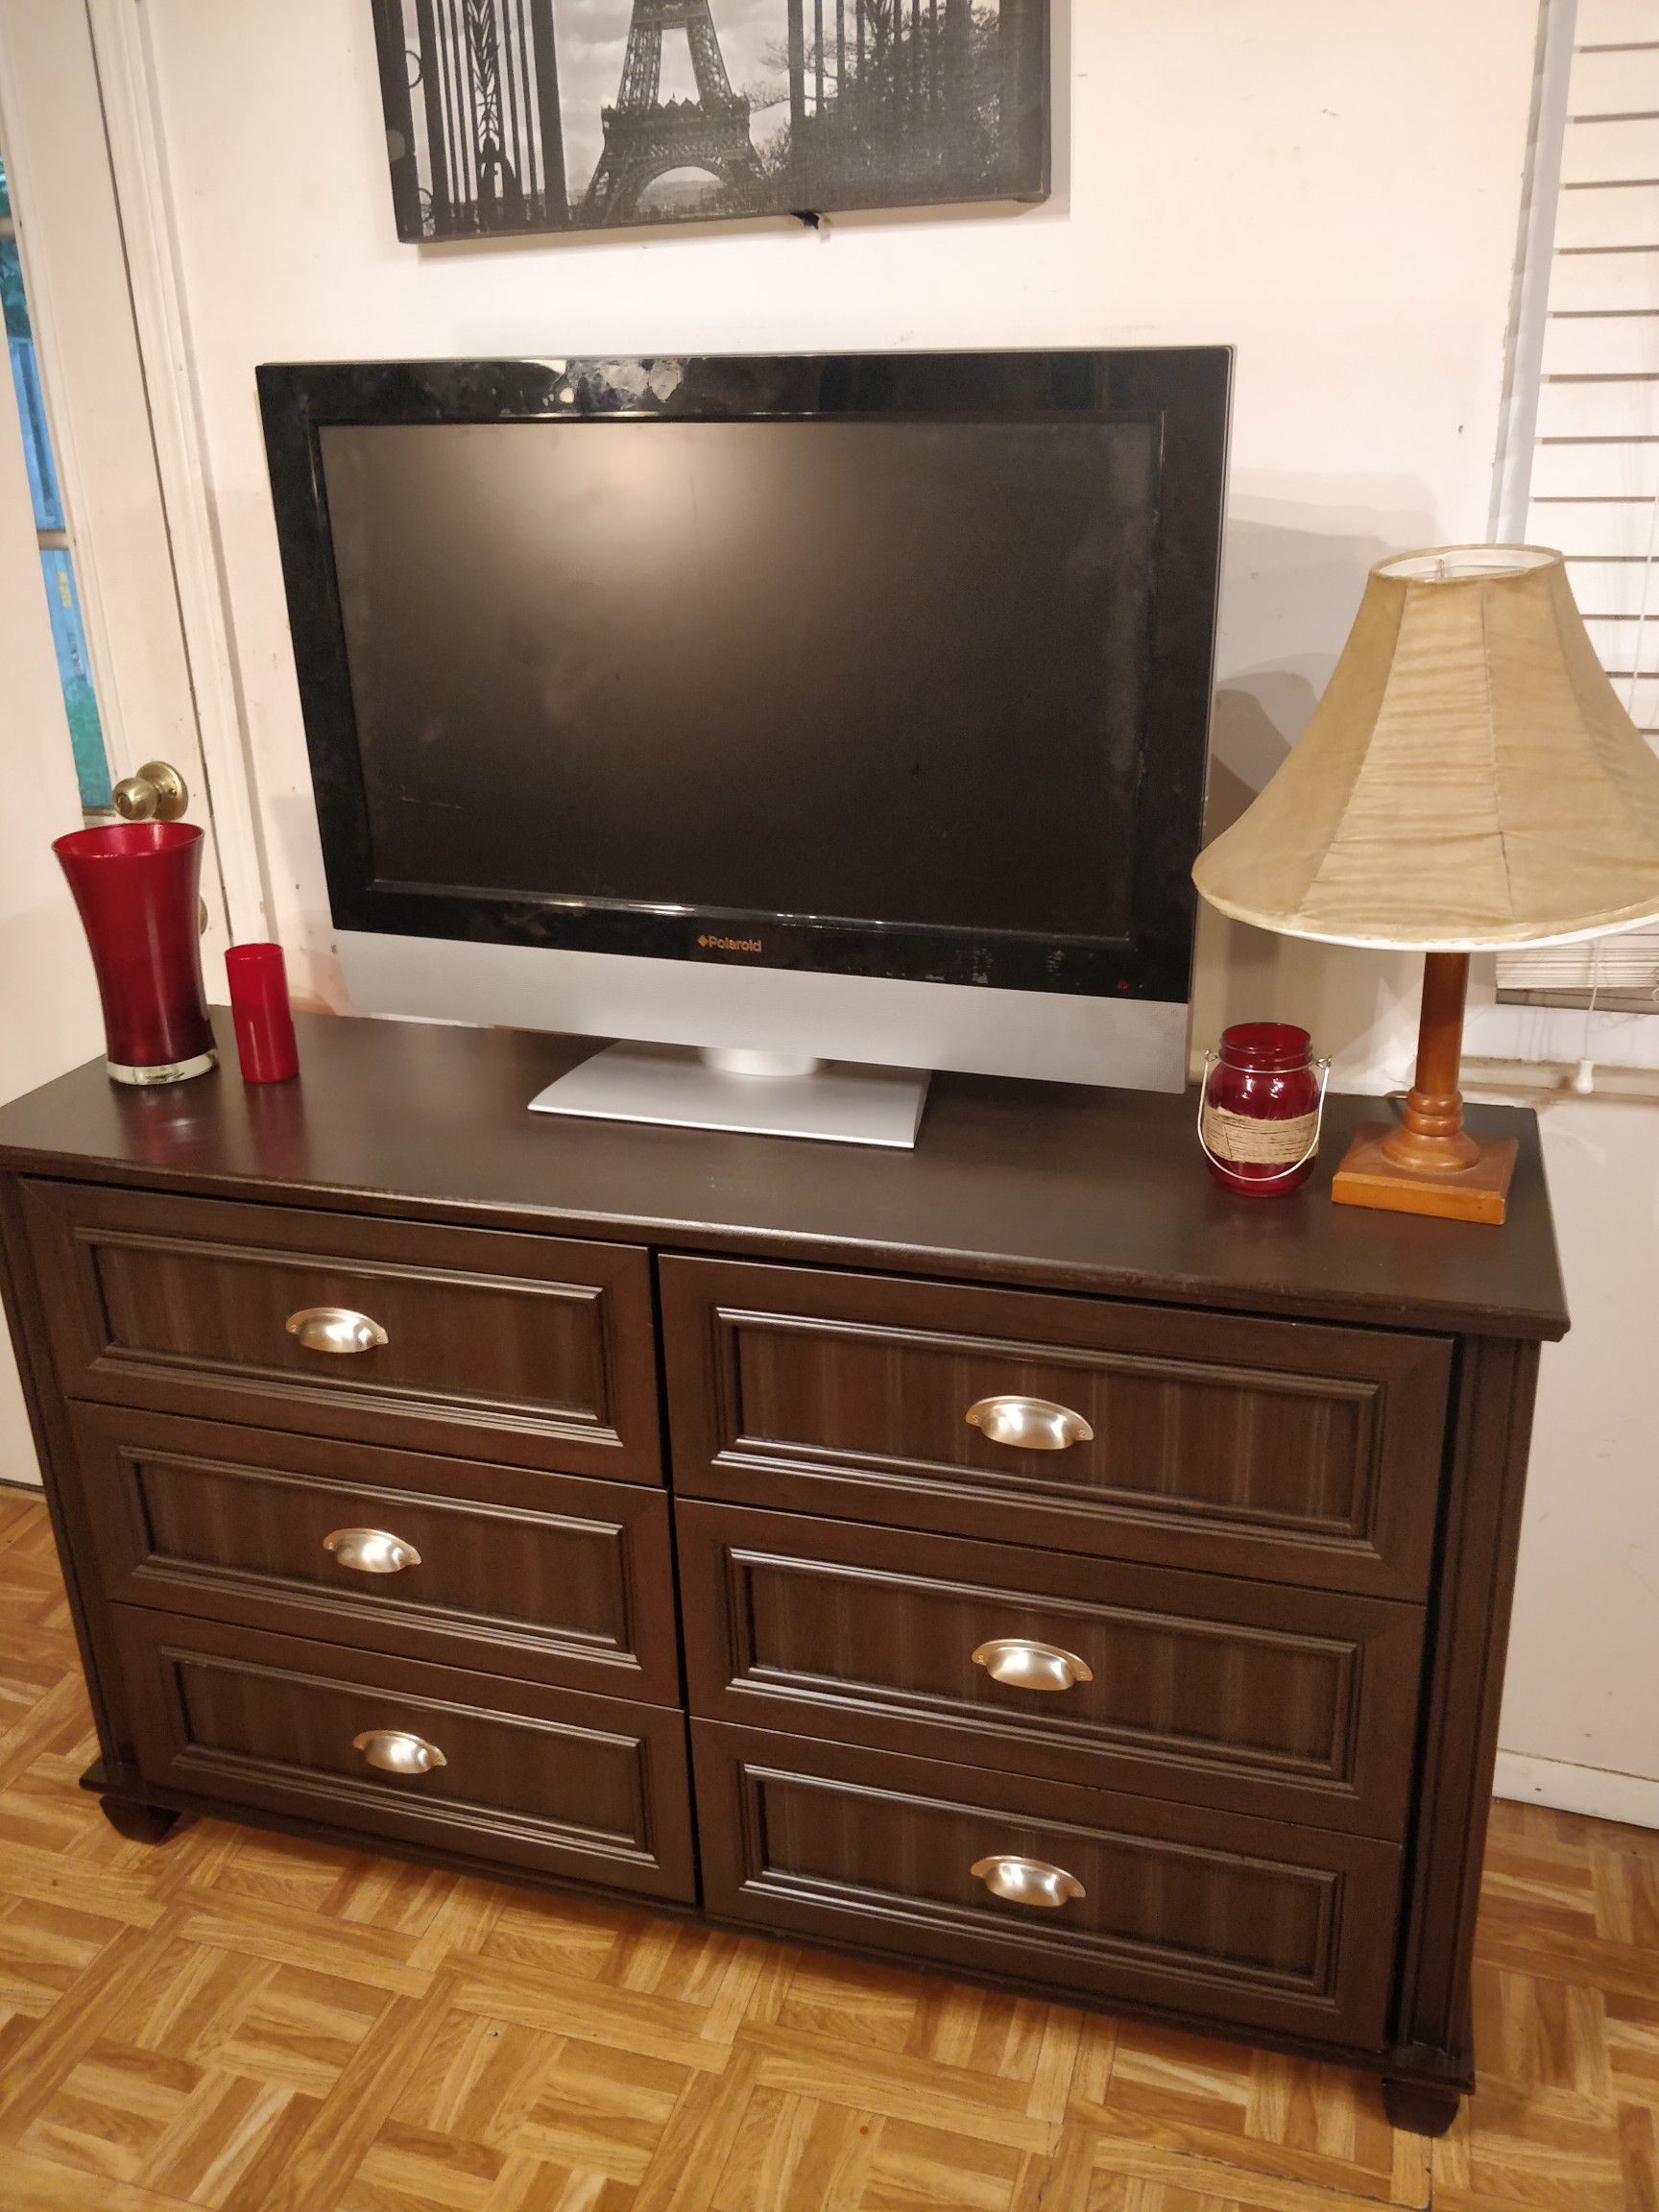 Nice dresser/TV stand with 6 drawers in great condition, all drawers working well. L54"*W16"*H28"